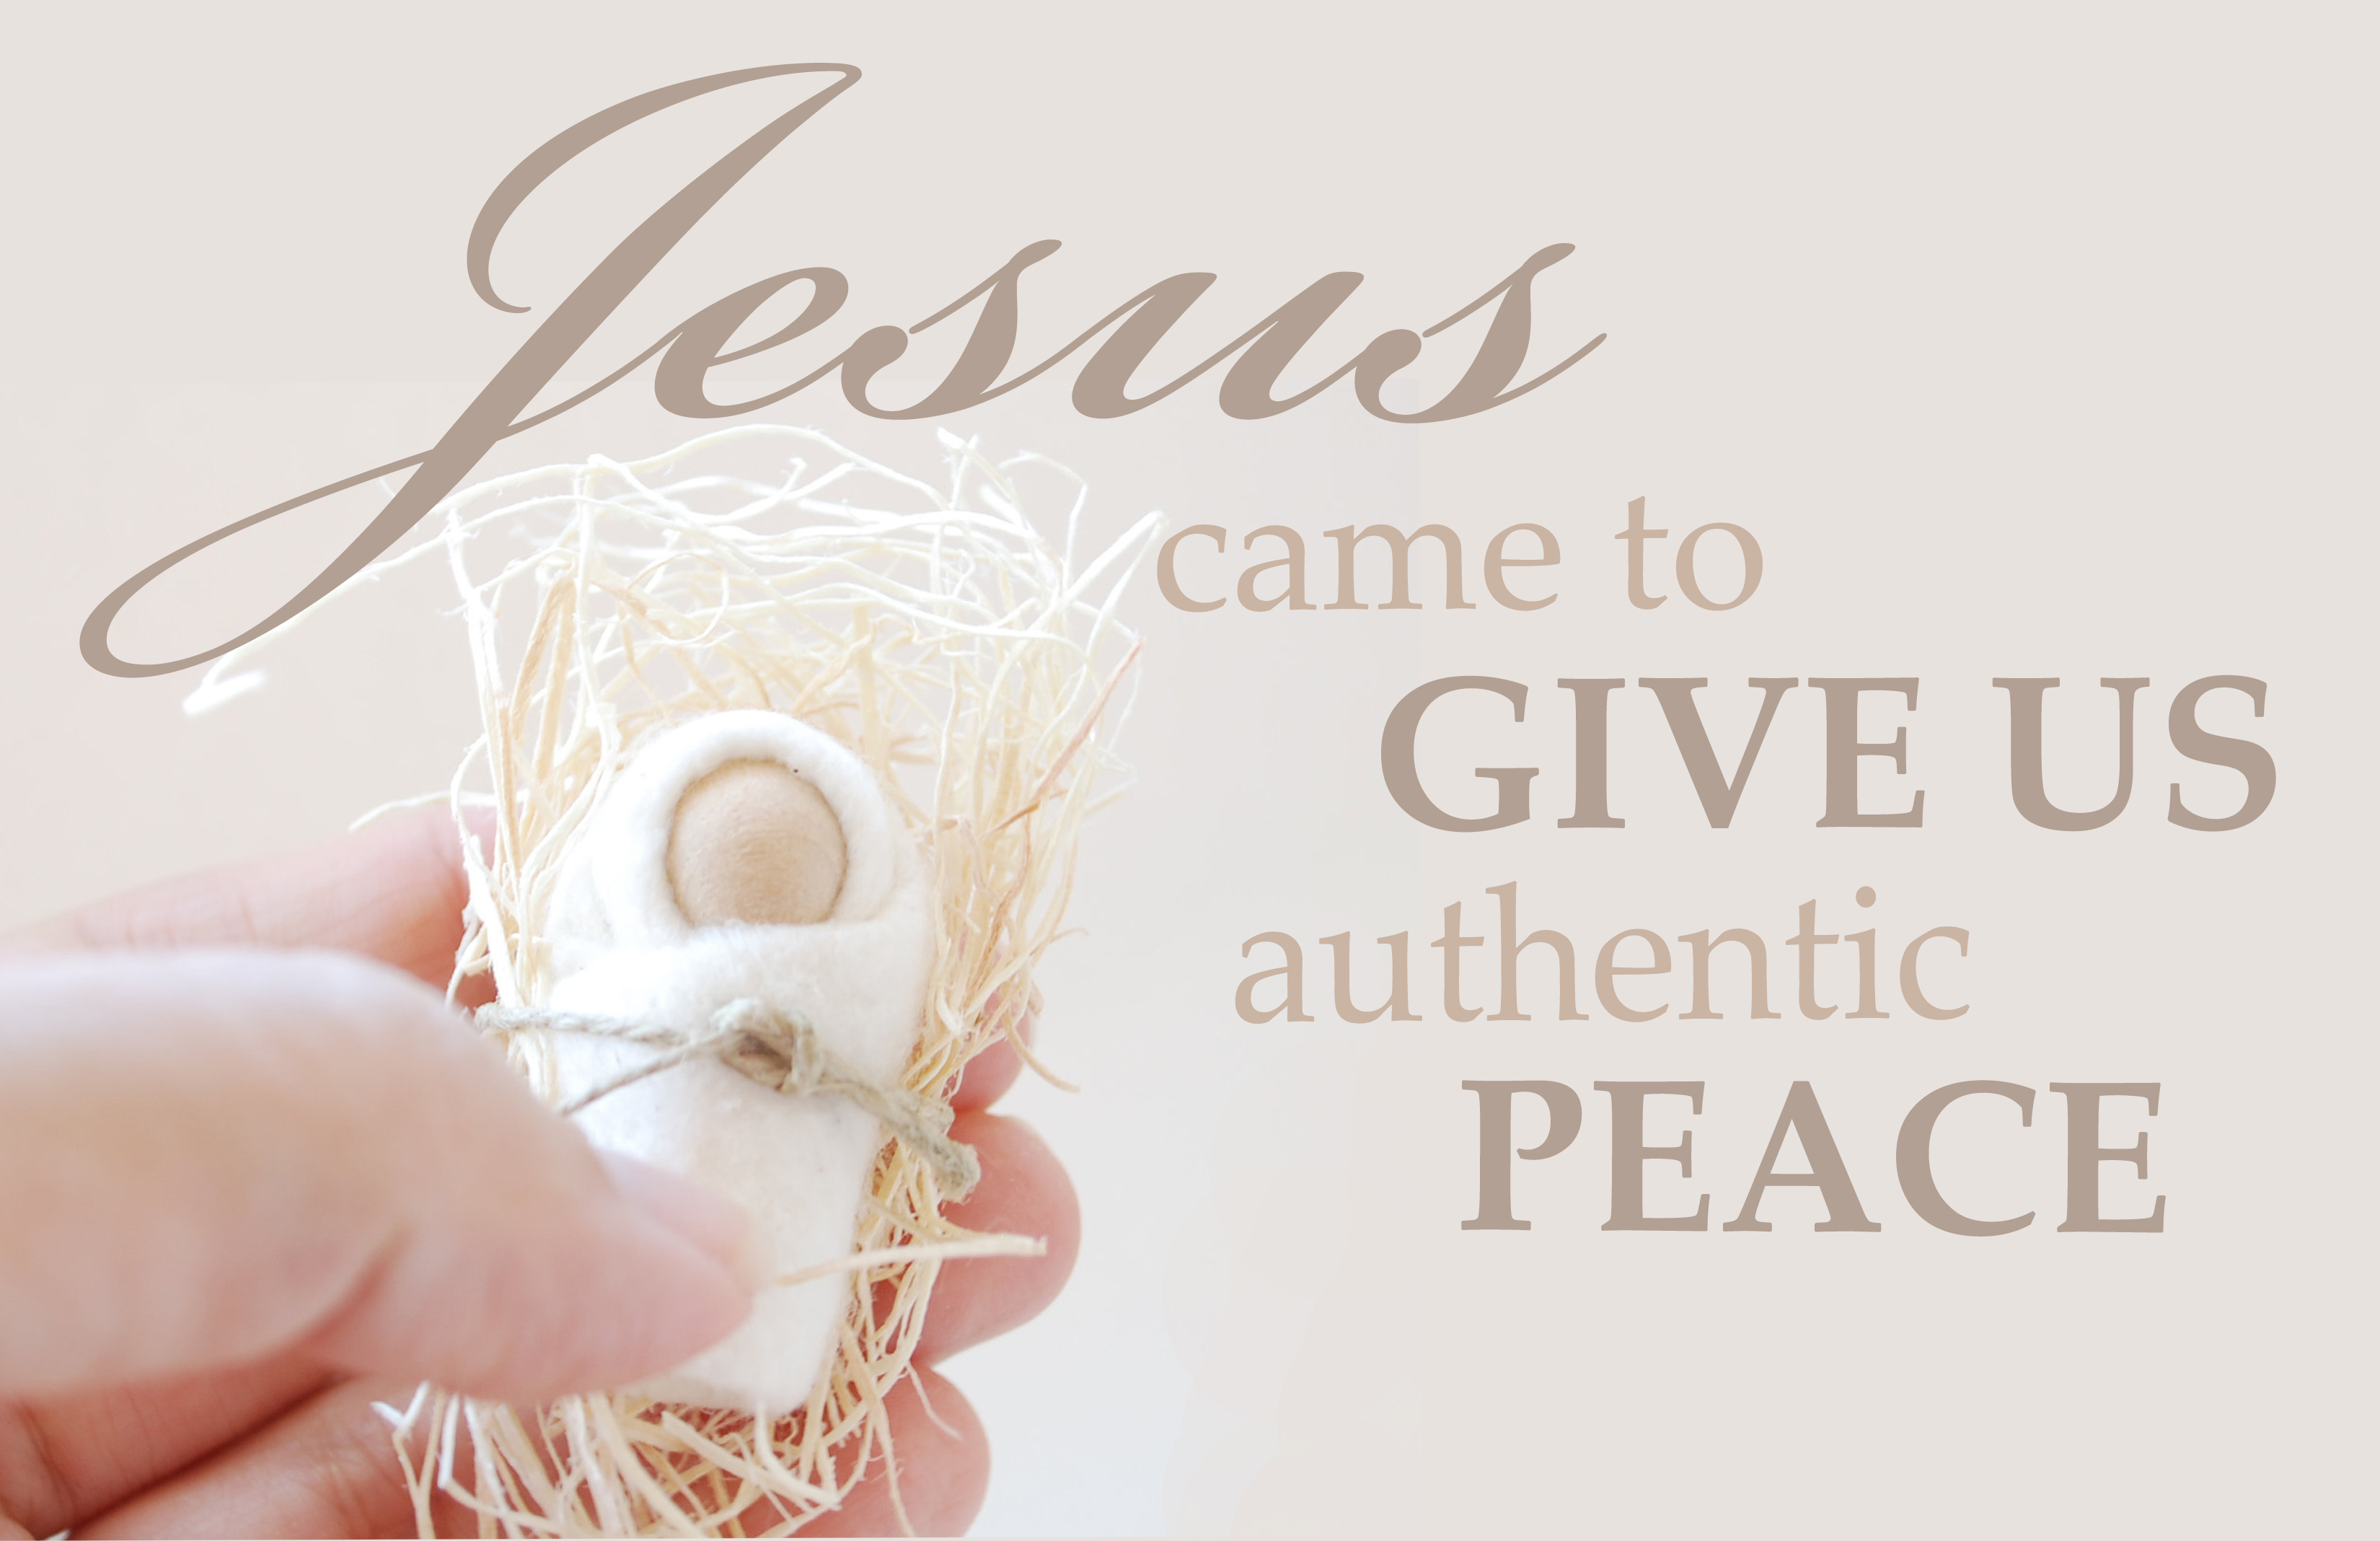 12-22-13 Jesus Came To Give Us Authentic Peace